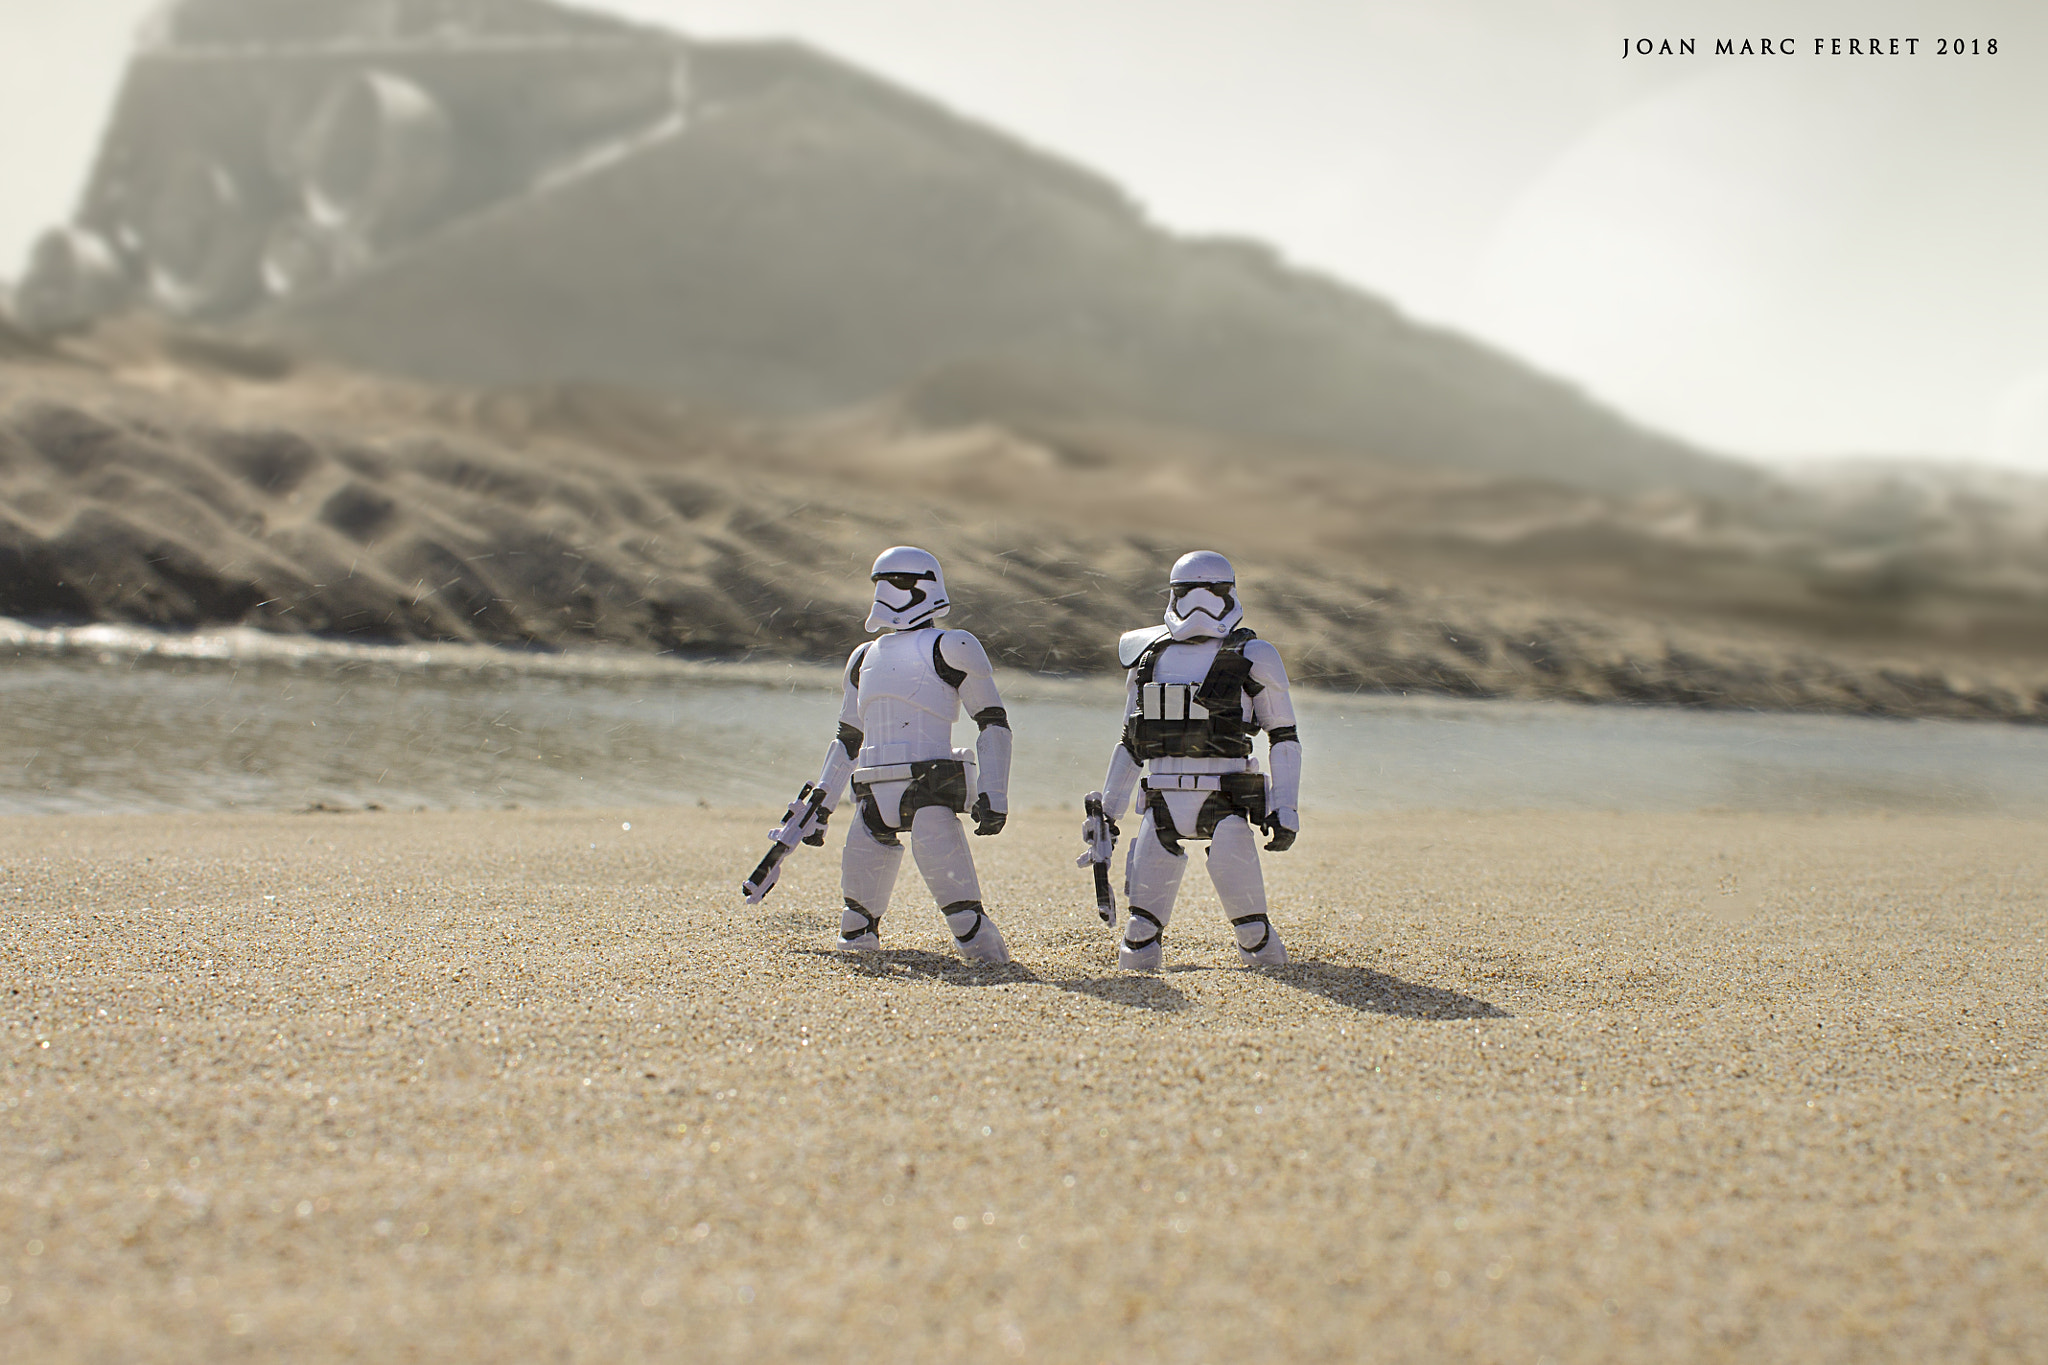 The First Order Star Wars 500px Toys Sand Stormtrooper 2018 Year 2048x1365